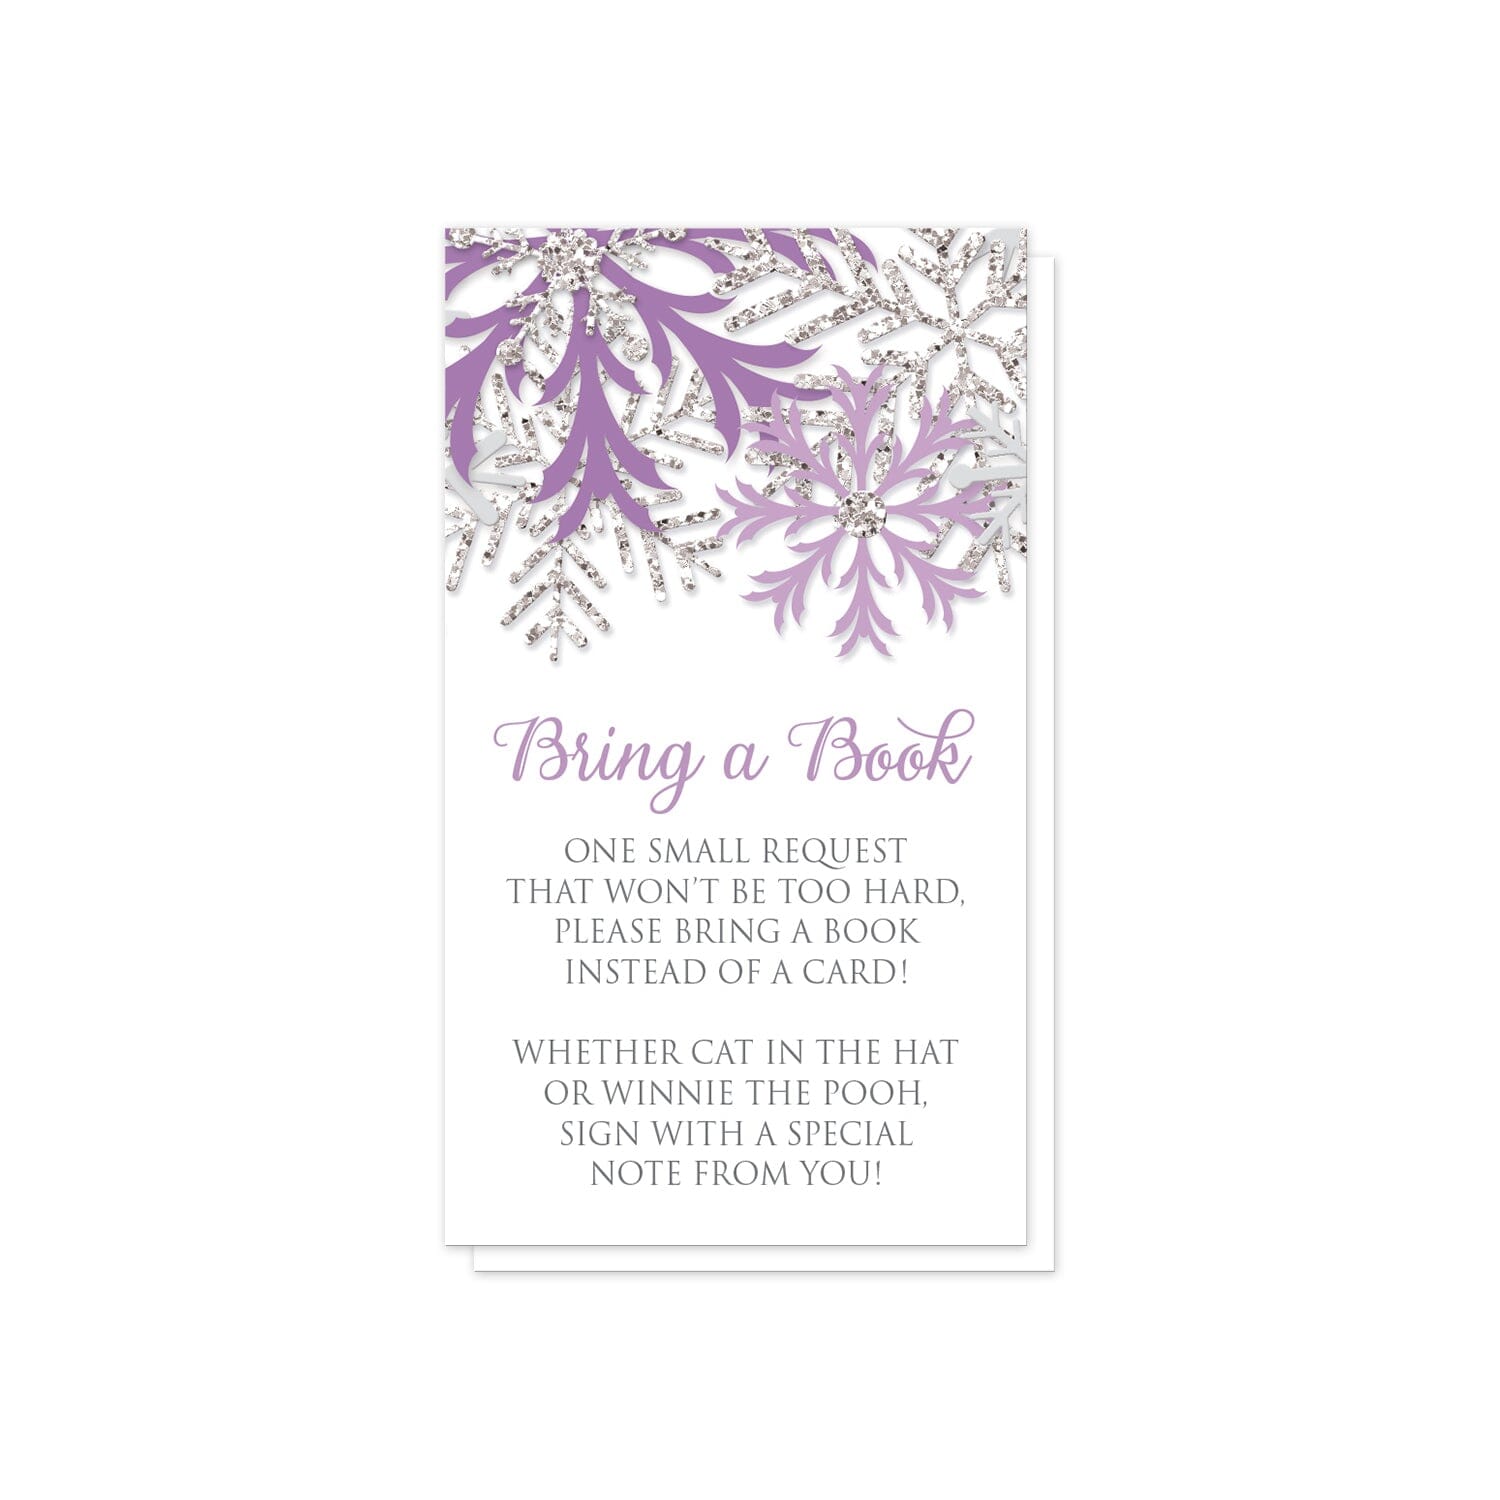 Winter Purple Silver Snowflake Bring a Book Cards at Artistically Invited. Pretty winter purple silver snowflake bring a book cards designed with purple, light purple, and silver-colored glitter-illustrated snowflakes along the top. Your book request details are printed in purple and gray over white below the snowflakes.